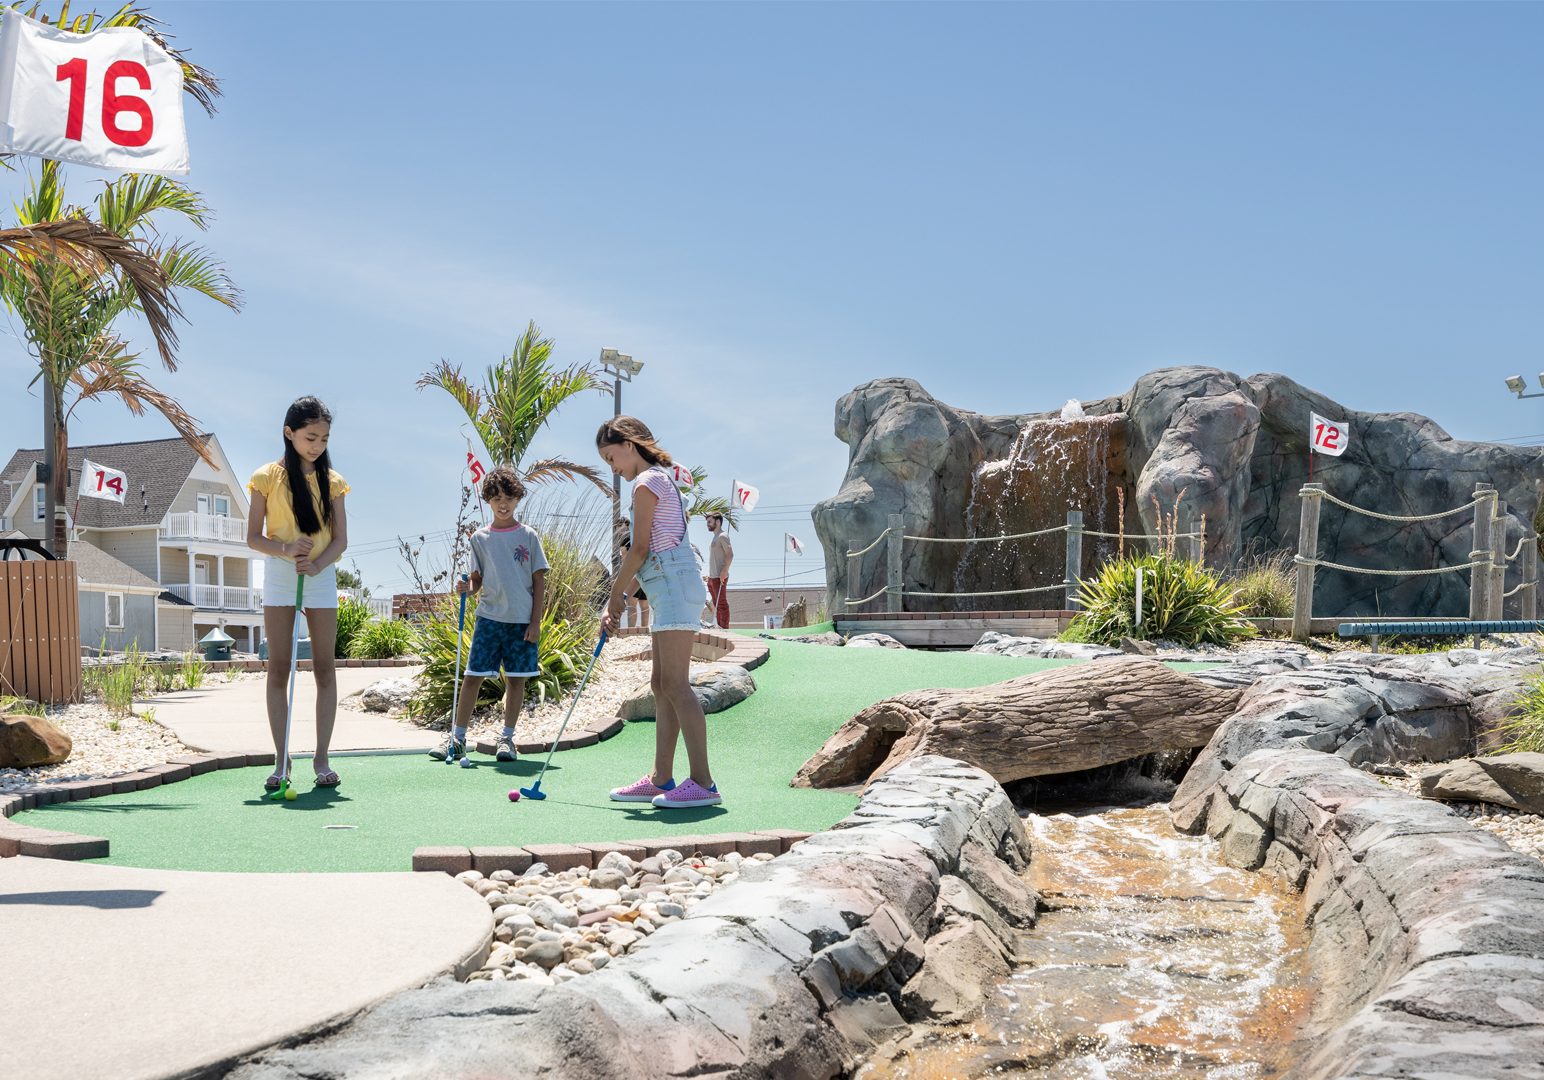 Three kids enjoy a round of miniature golf outside at Lighthouse Point at Jenkinson's Boardwalk